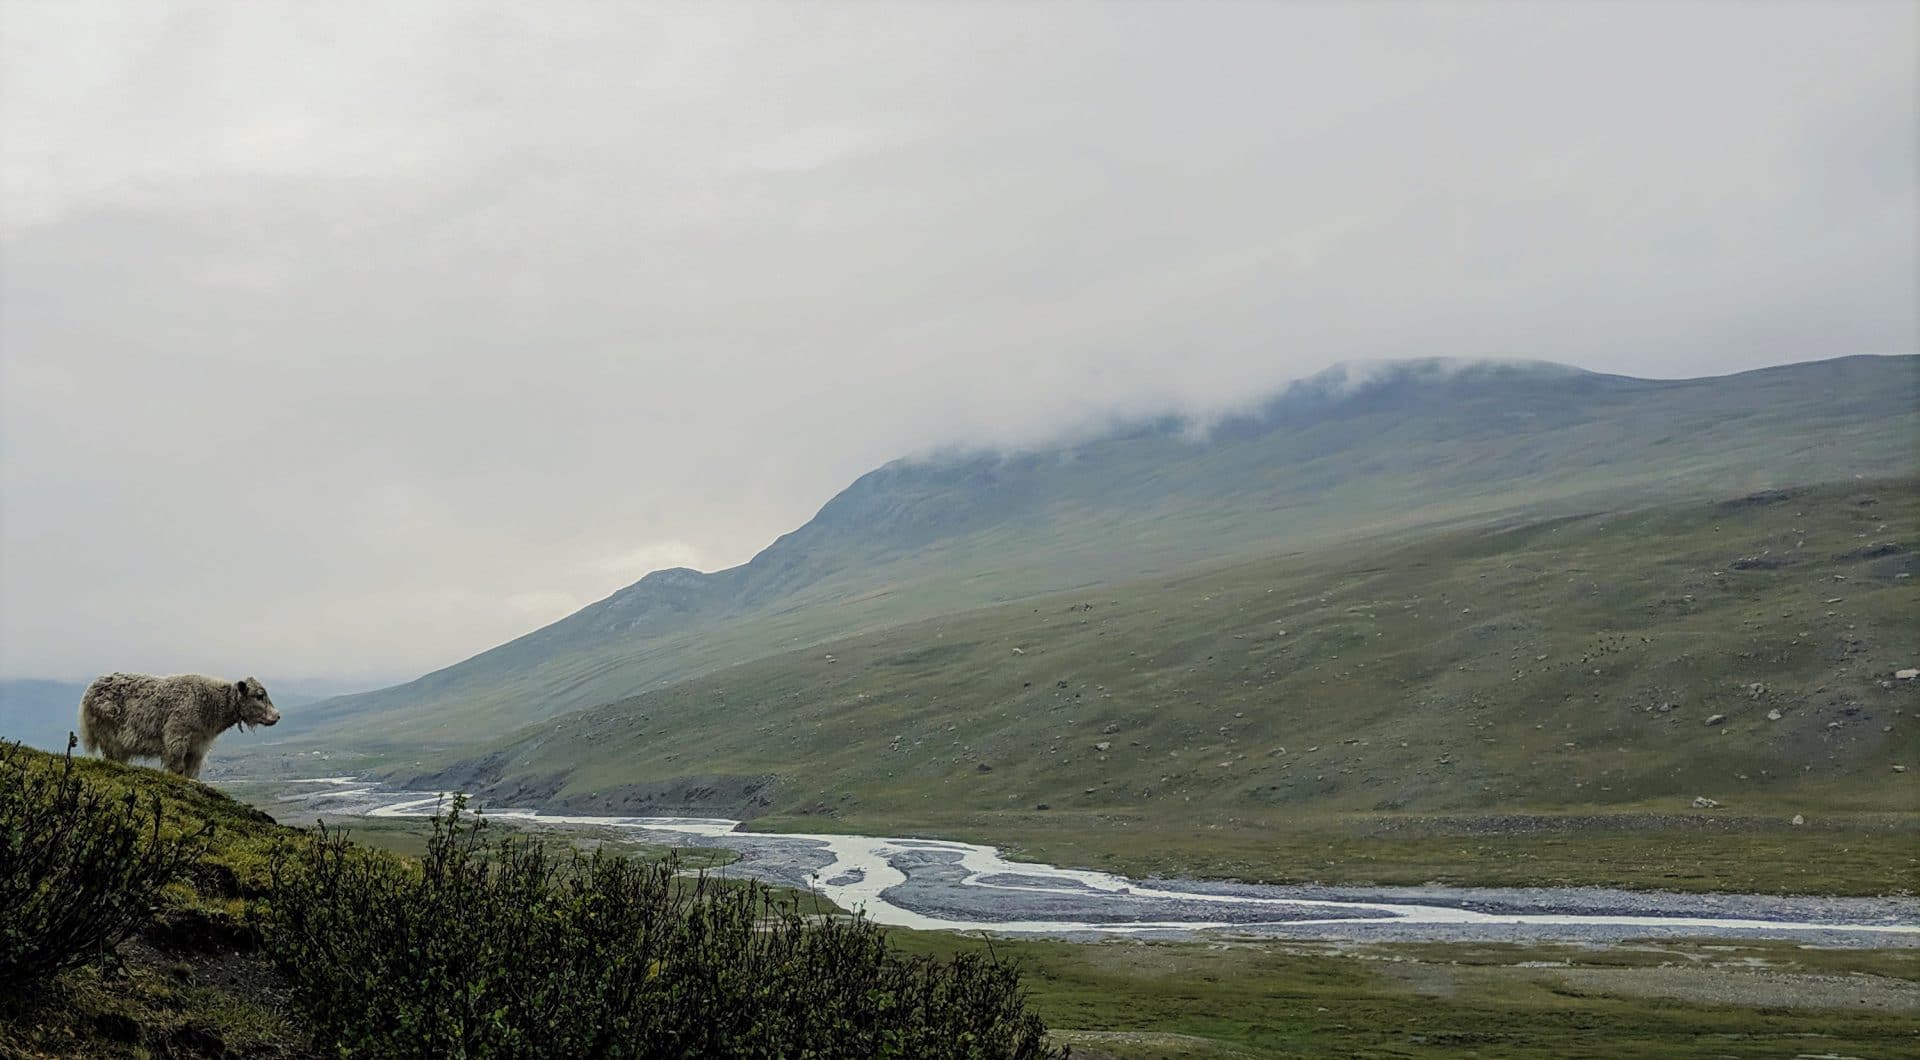 Potanin Glacier is the source of the Tsagaan Gol (White River). Yaks, like the one pictured here, climb steep hills in search of the greenest grass to eat.